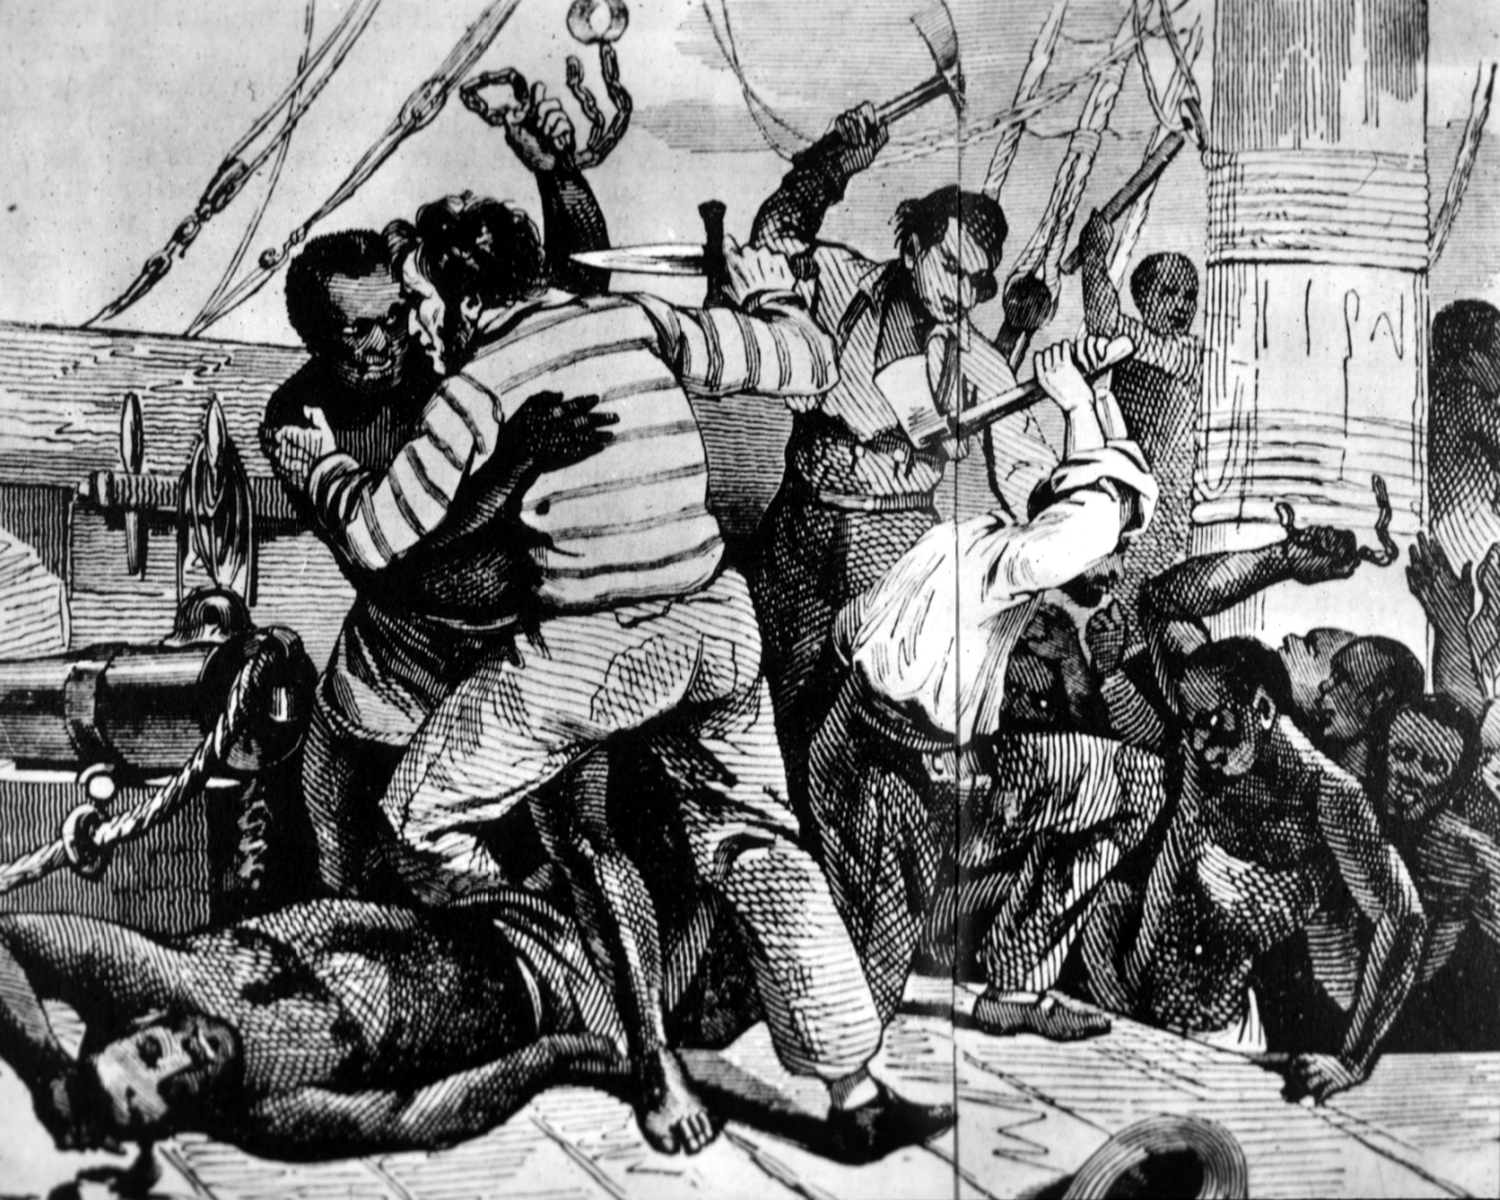 Artistic representation of a slave uprising on a ship's deck, depicting Africans and Europeans in combat, departing from an unspecified West African location, possibly Guinea.